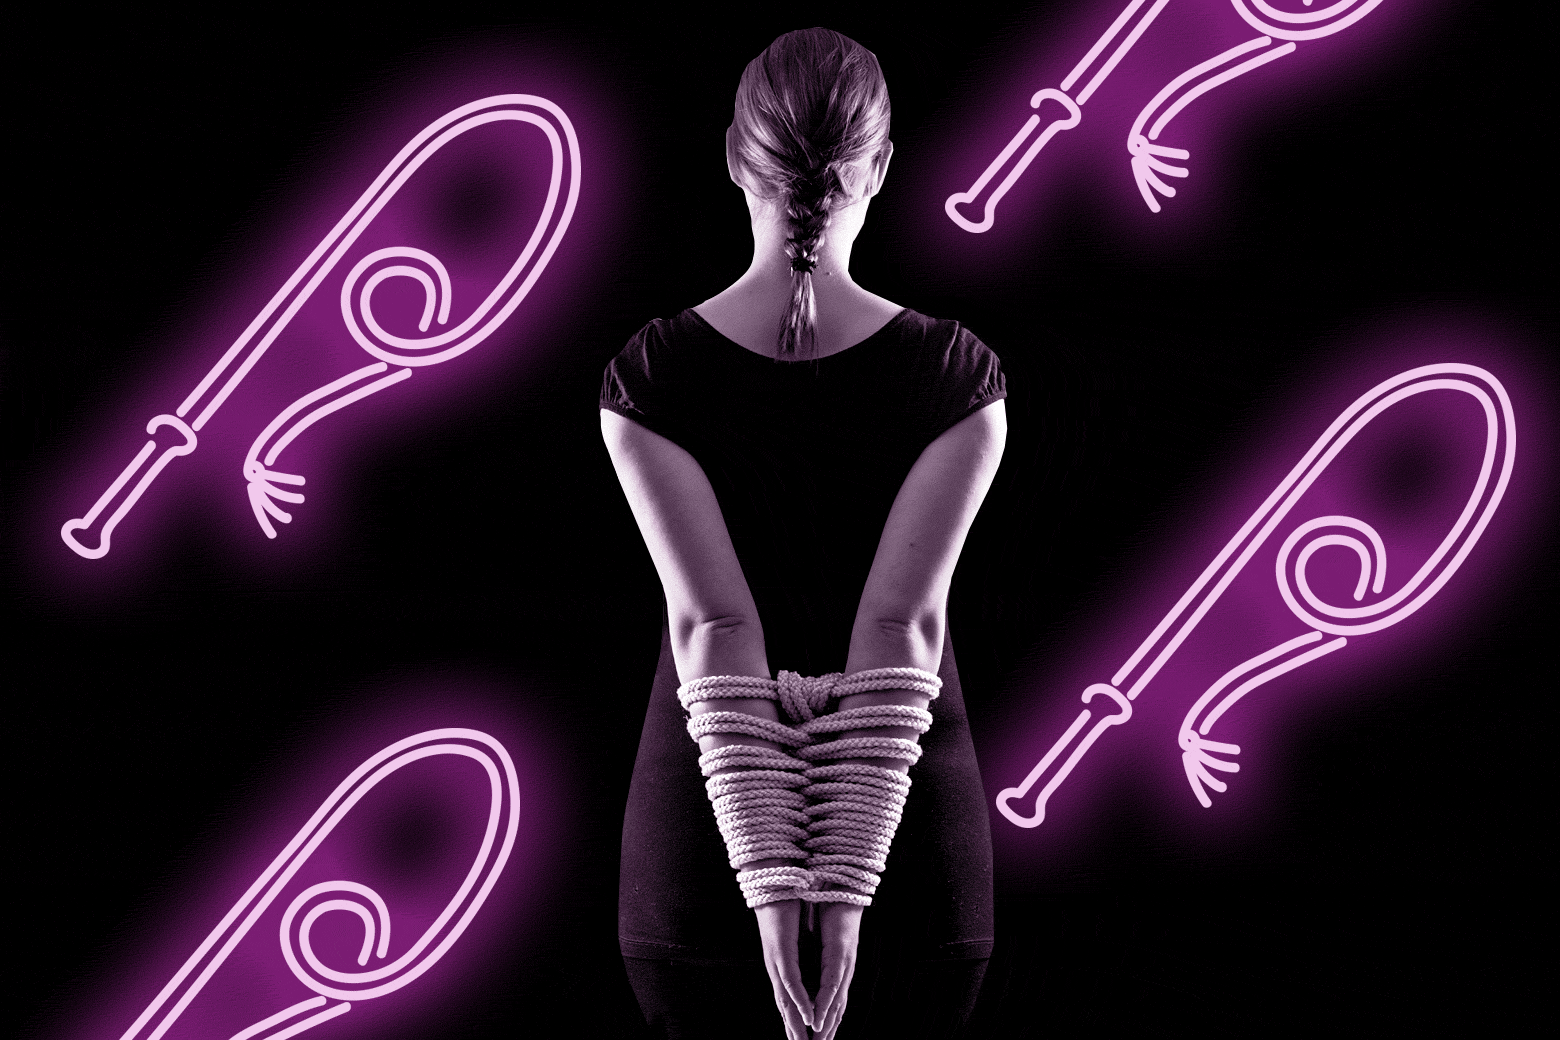 GIF of a woman with bound wrists. Neon whips glow in the background.